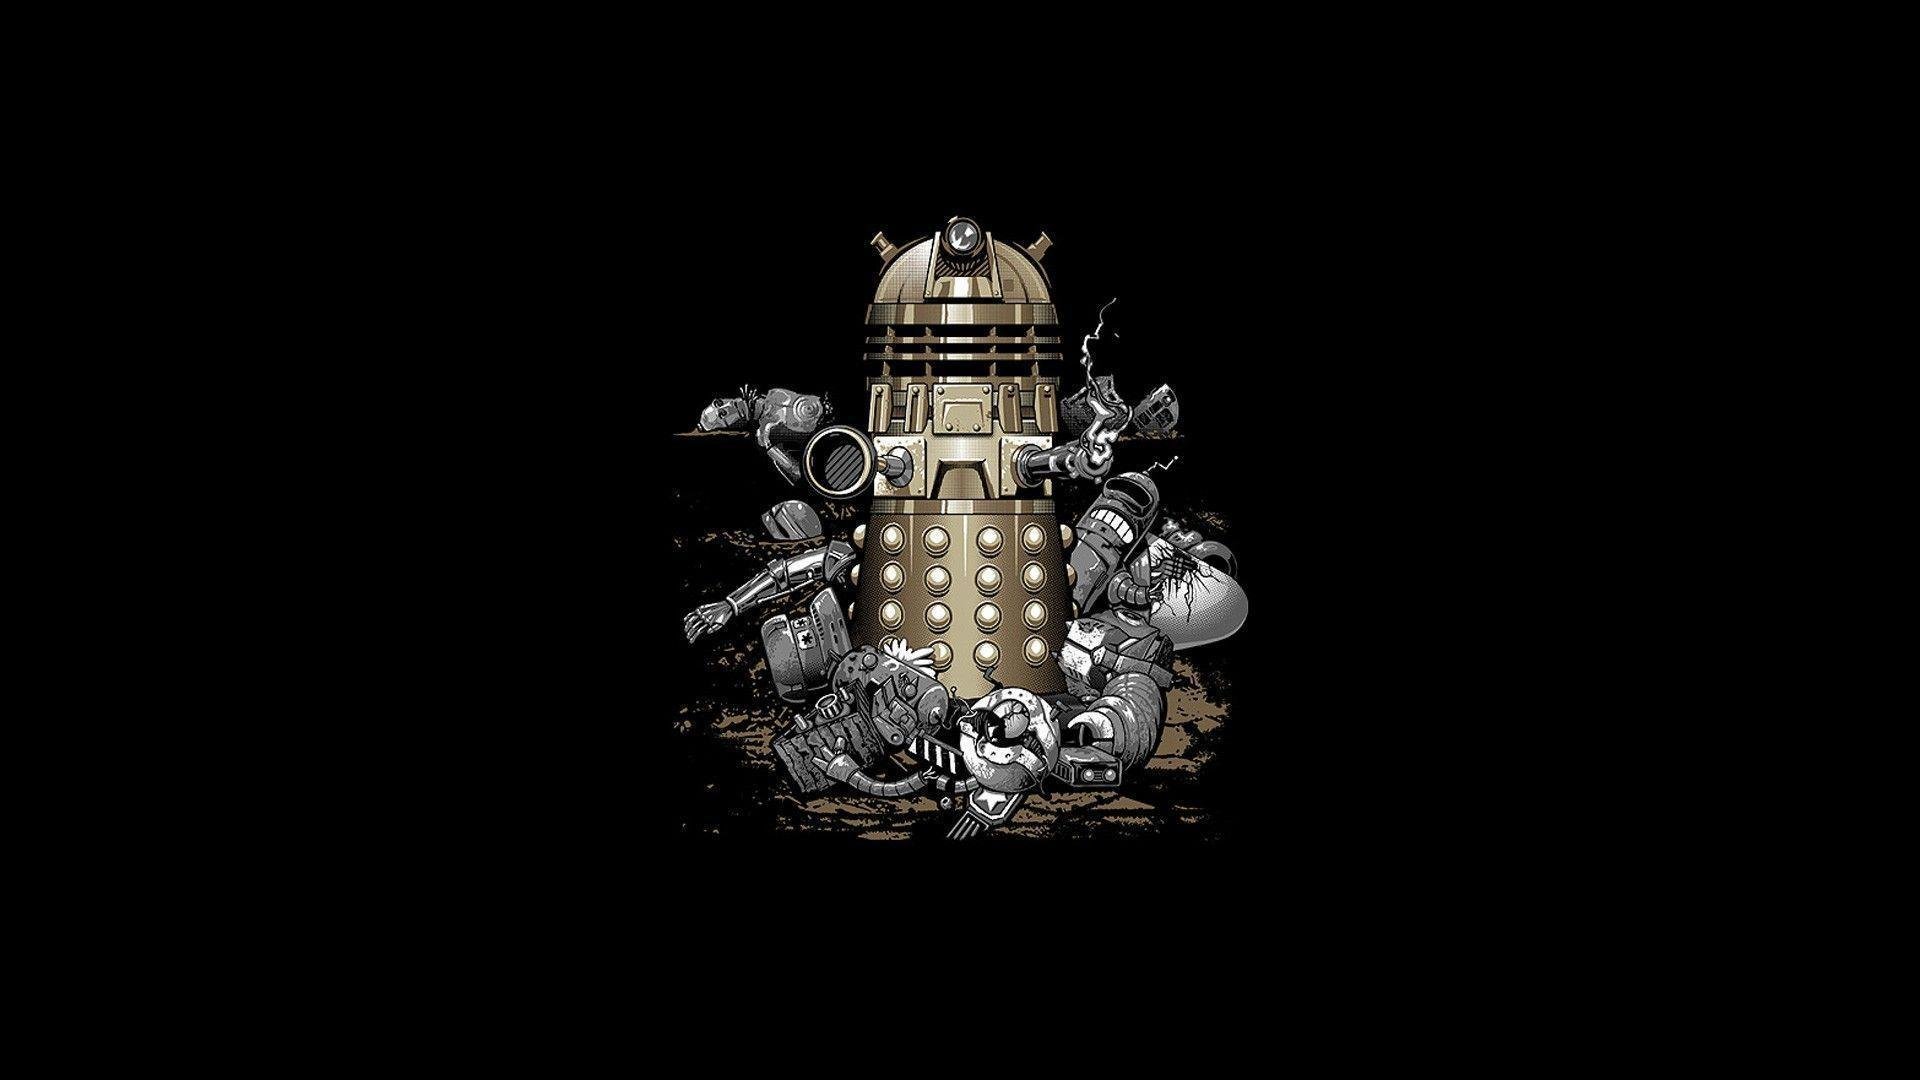 Wallpapers For > Doctor Who Wallpapers Hd Dalek